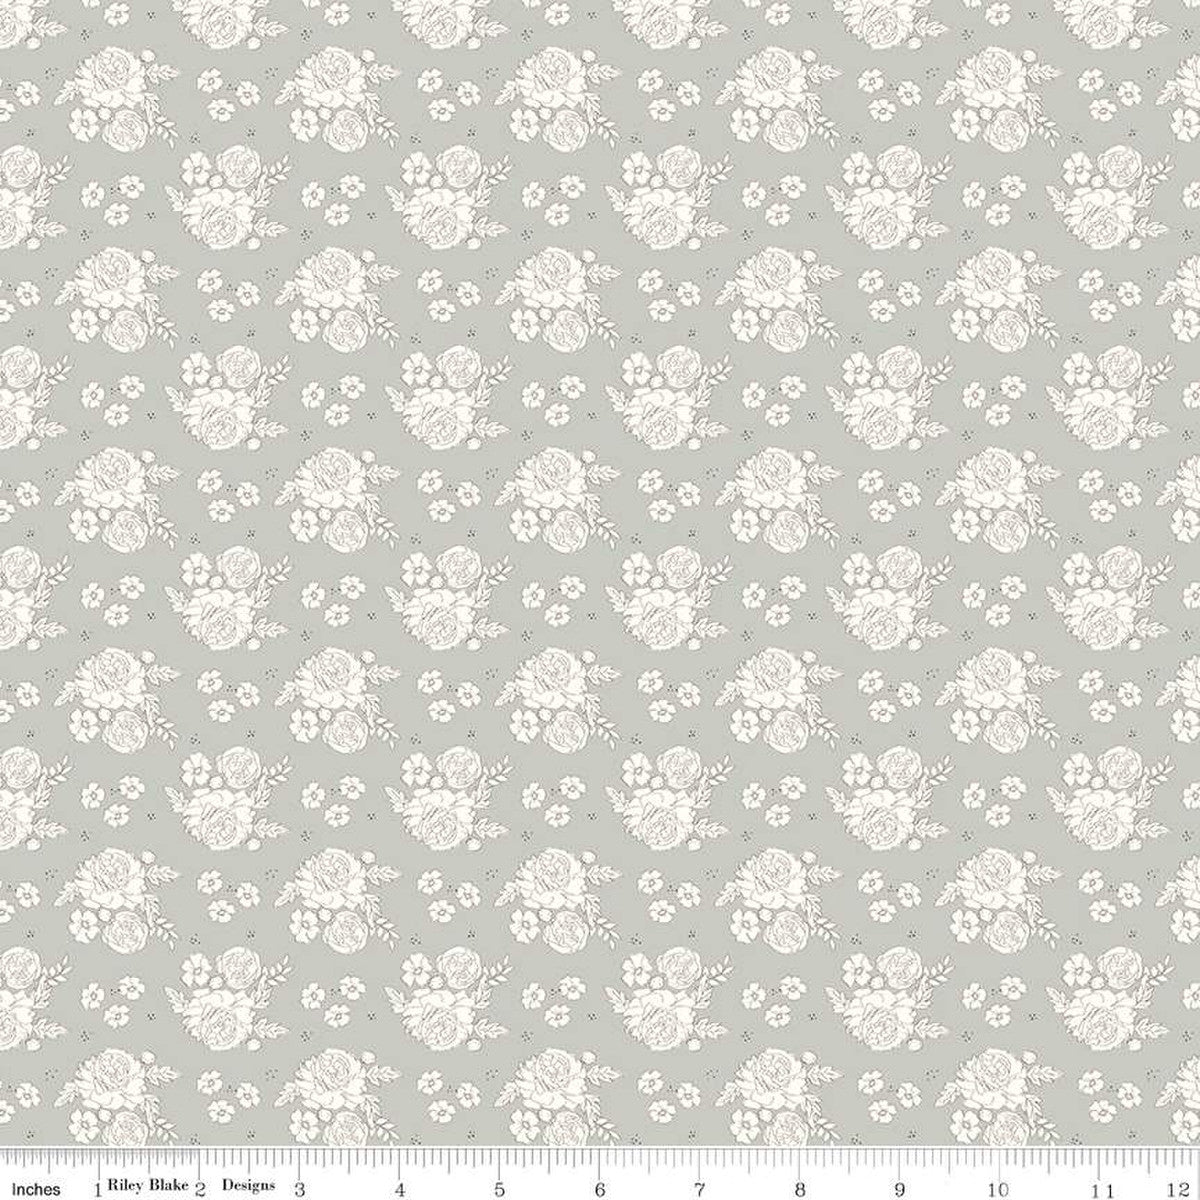 BloomBerry Petite Flowers Gray